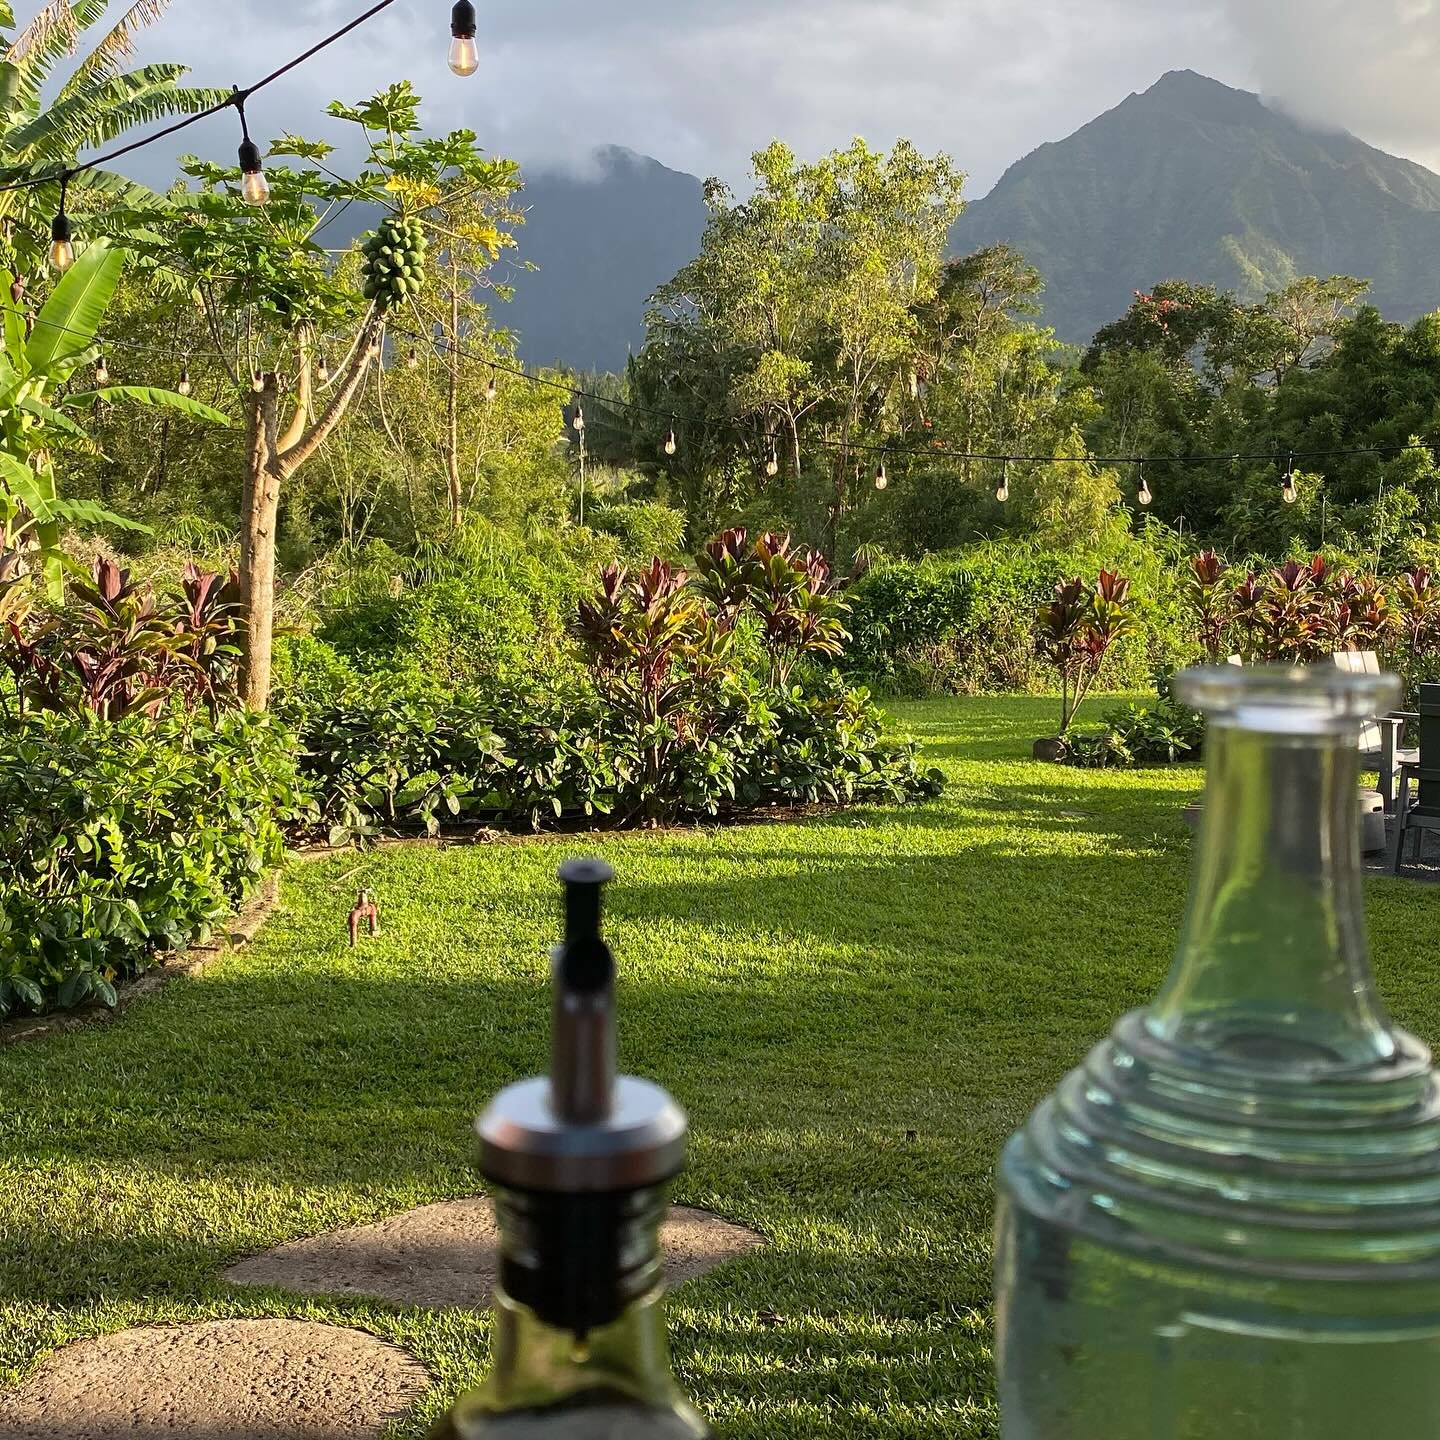 OUR VIEW at dinner last night. This is what we had the delight of looking at throughout our meal at Ama Restaurant in Hanalei, Kauai. Stunning flavors in a gorgeous setting. We&rsquo;ll be going back for more.